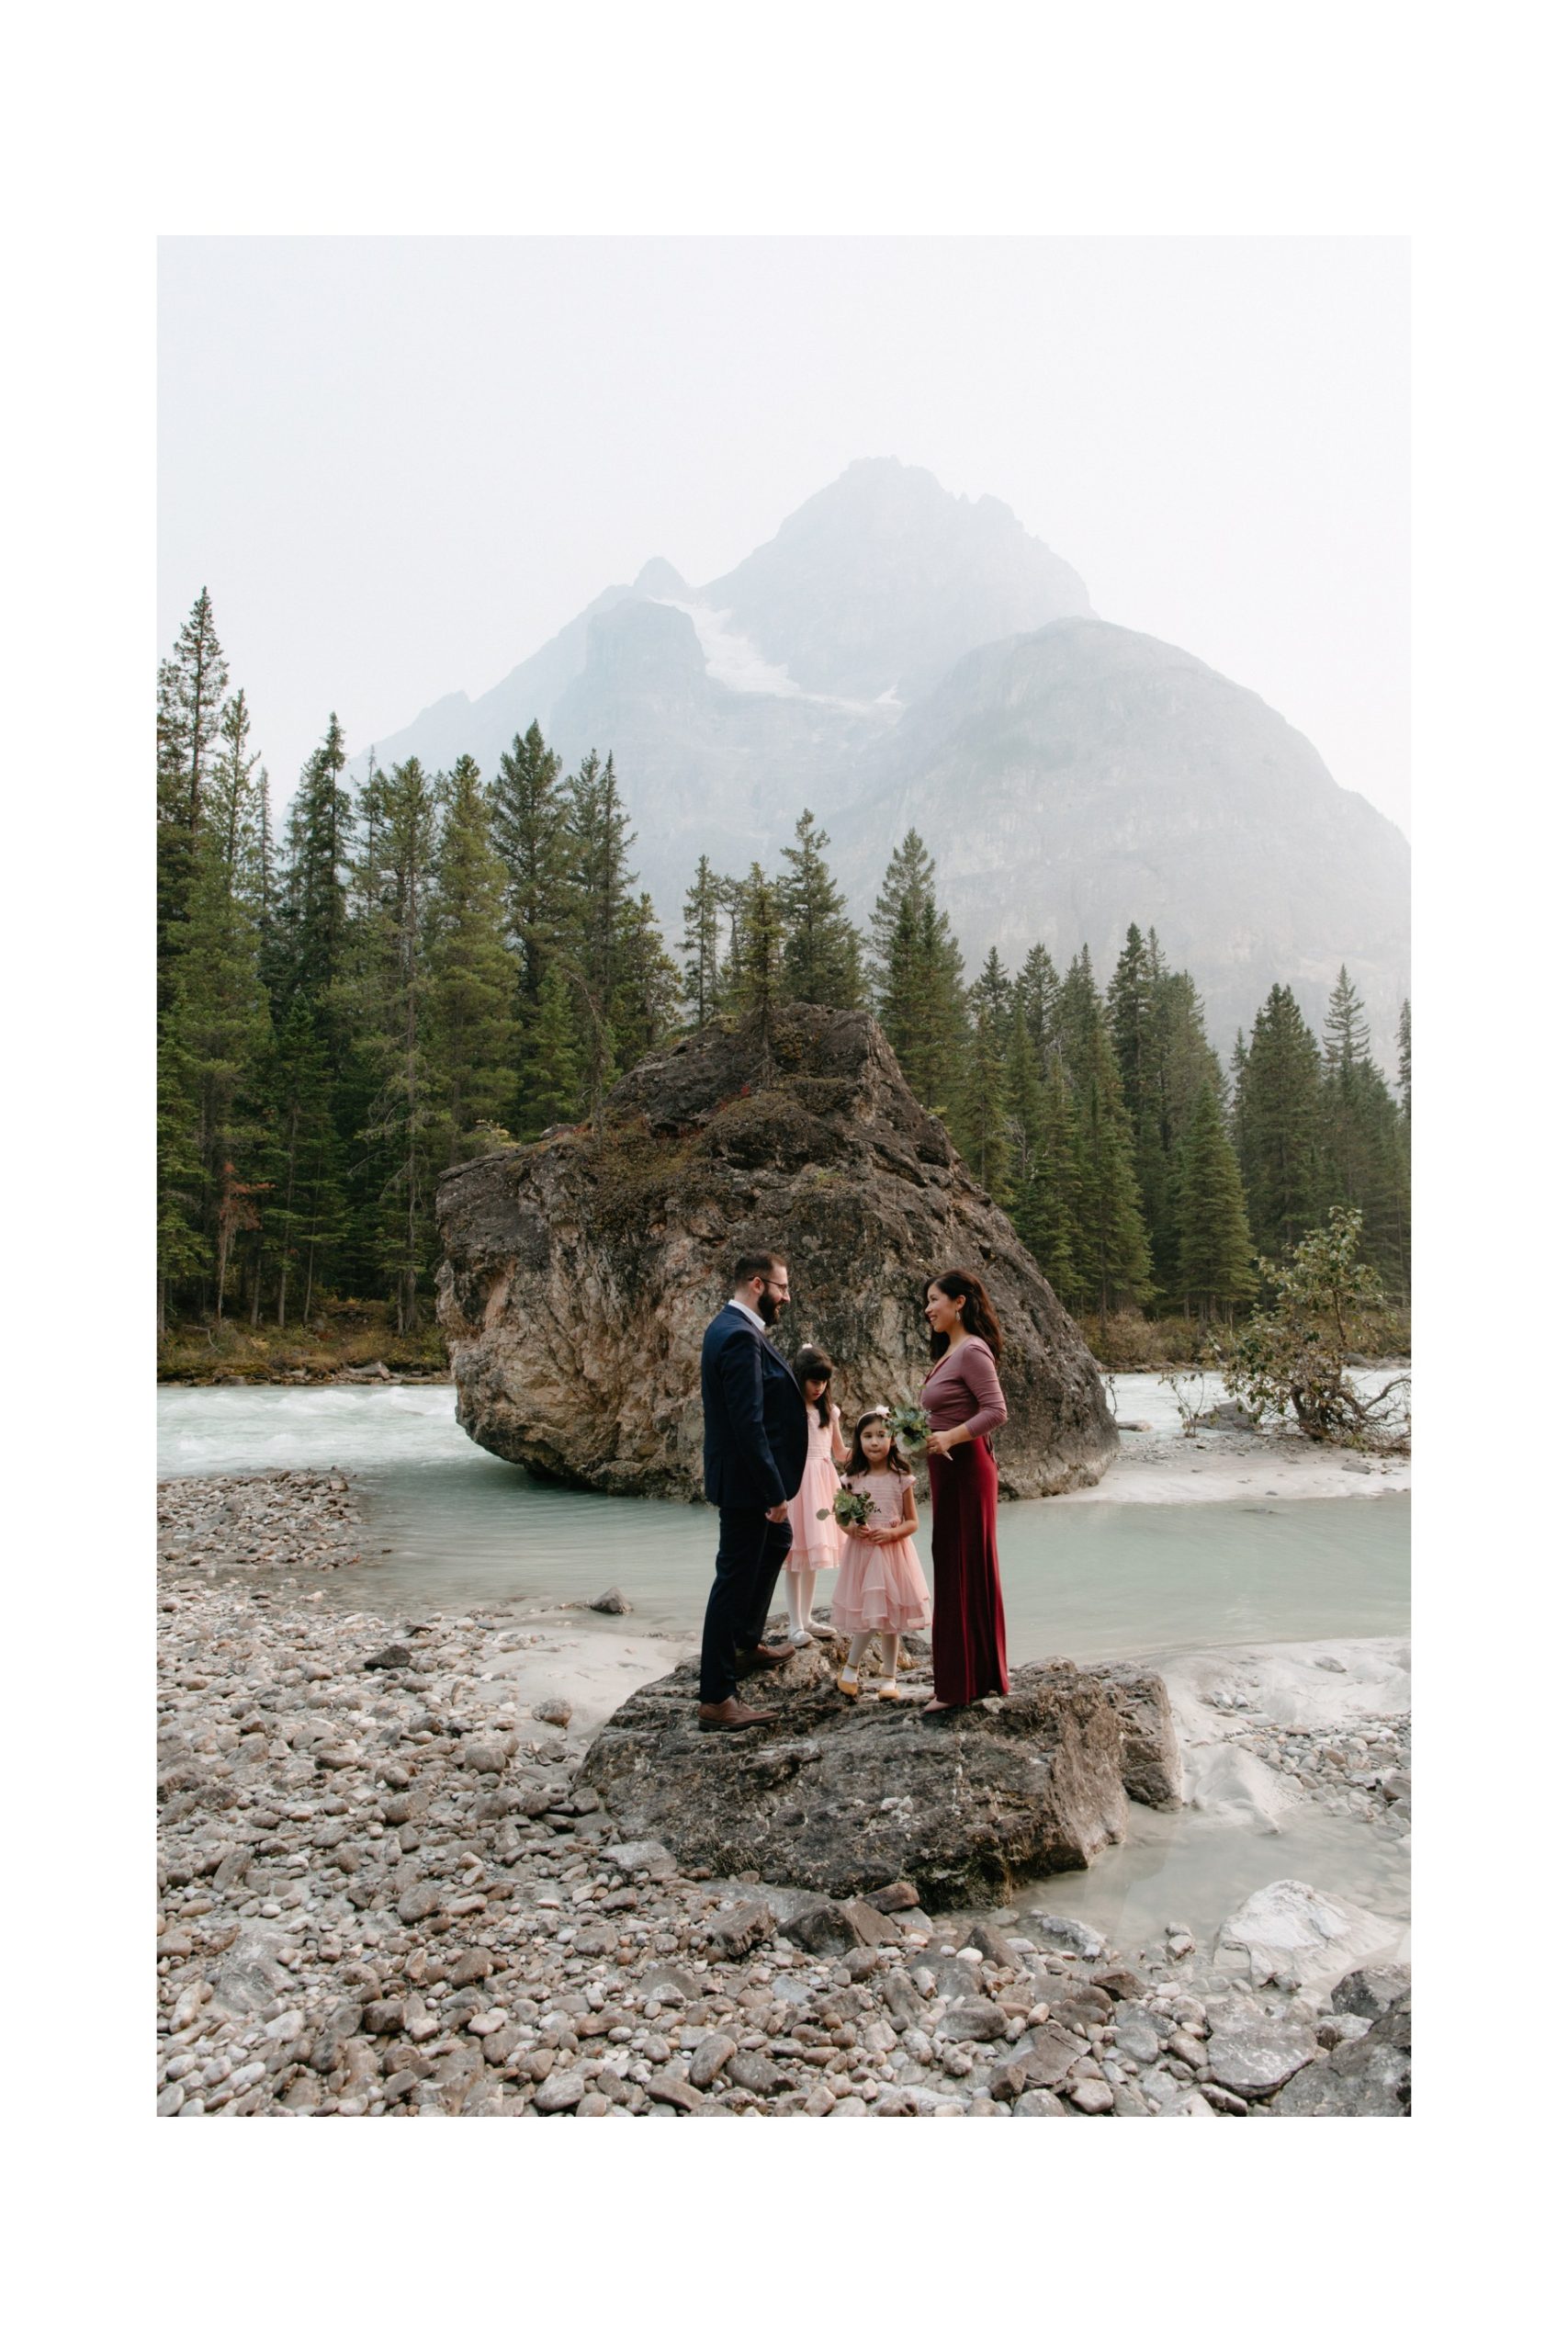 Family vow renewal in Banff National Park with parents exchanging vows with their daughters look on